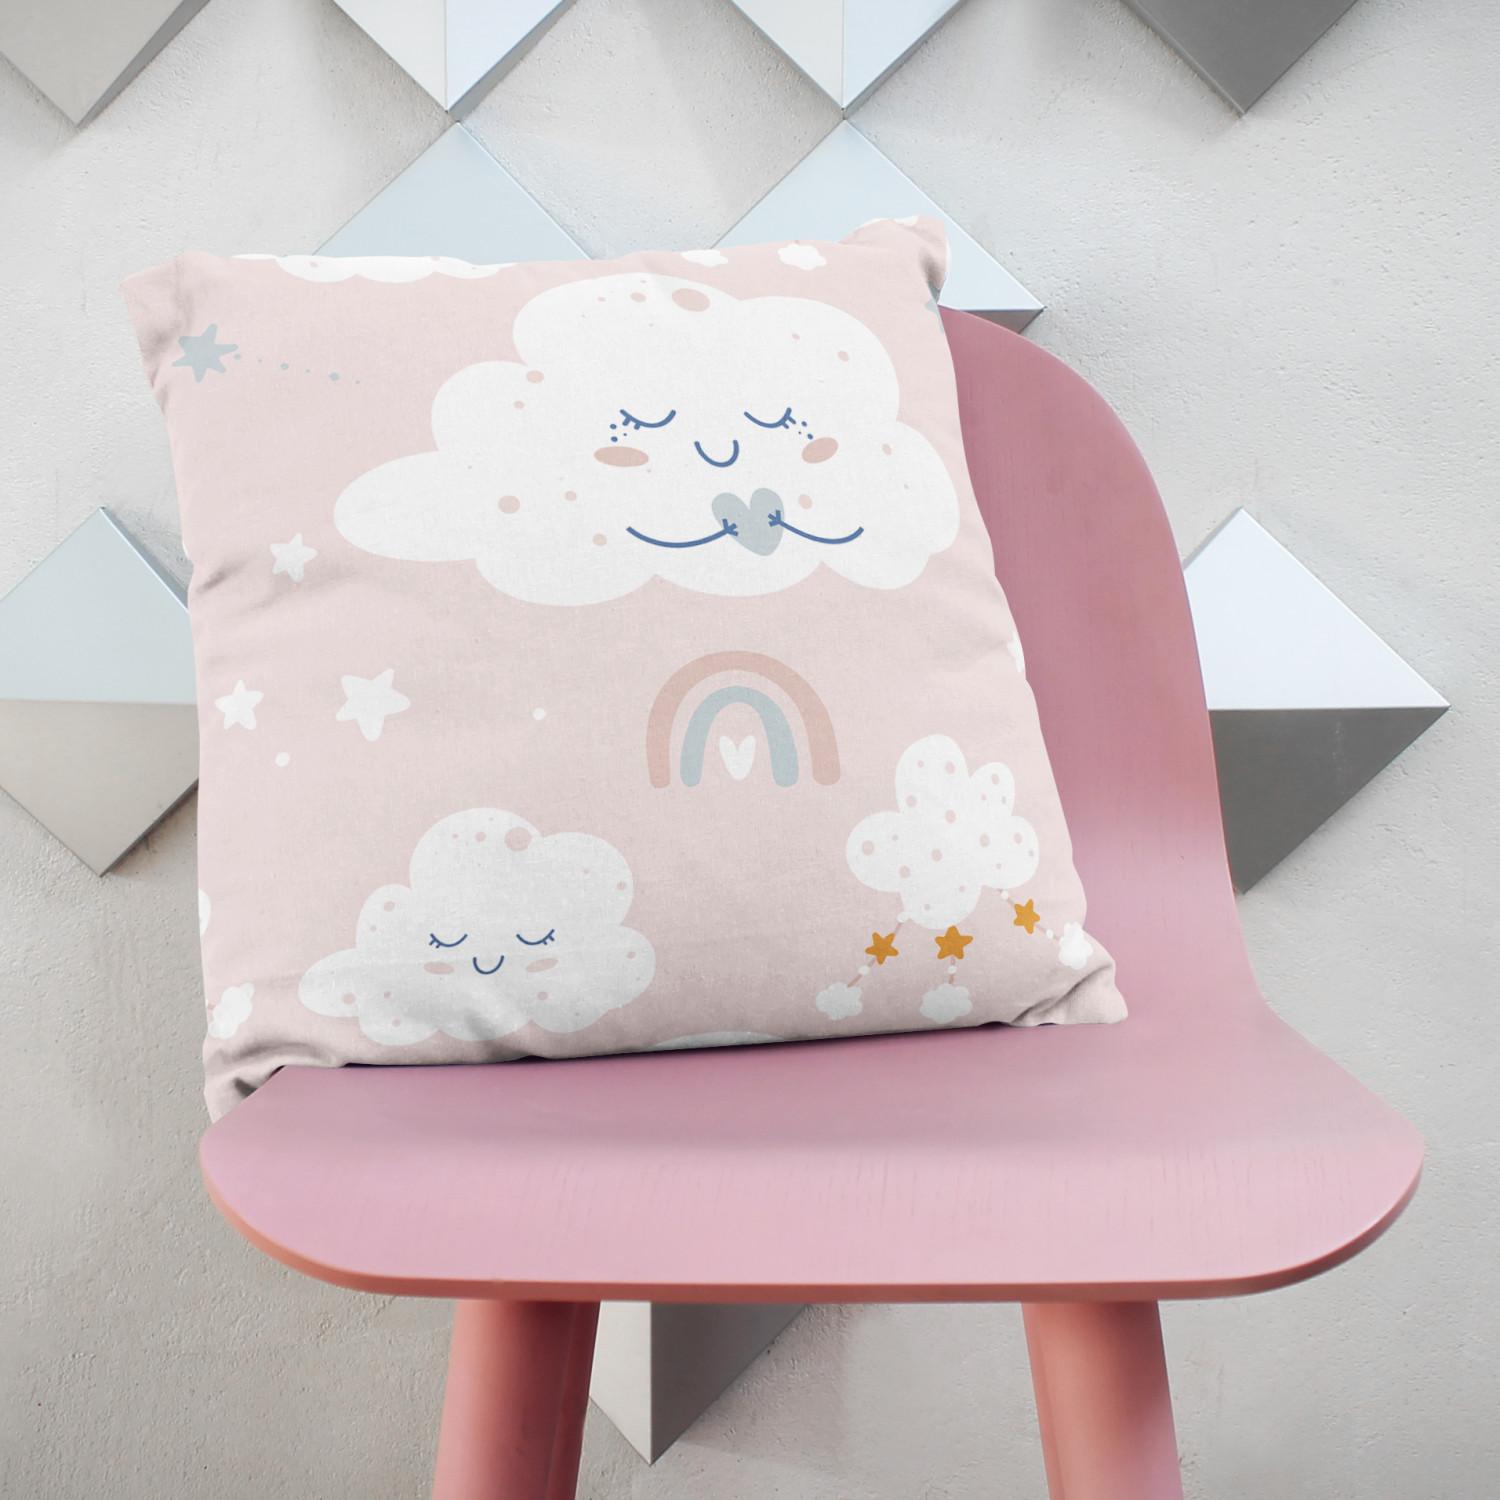 Decorative Microfiber Pillow Cloudscapes - composition in shades of white and pink cushions